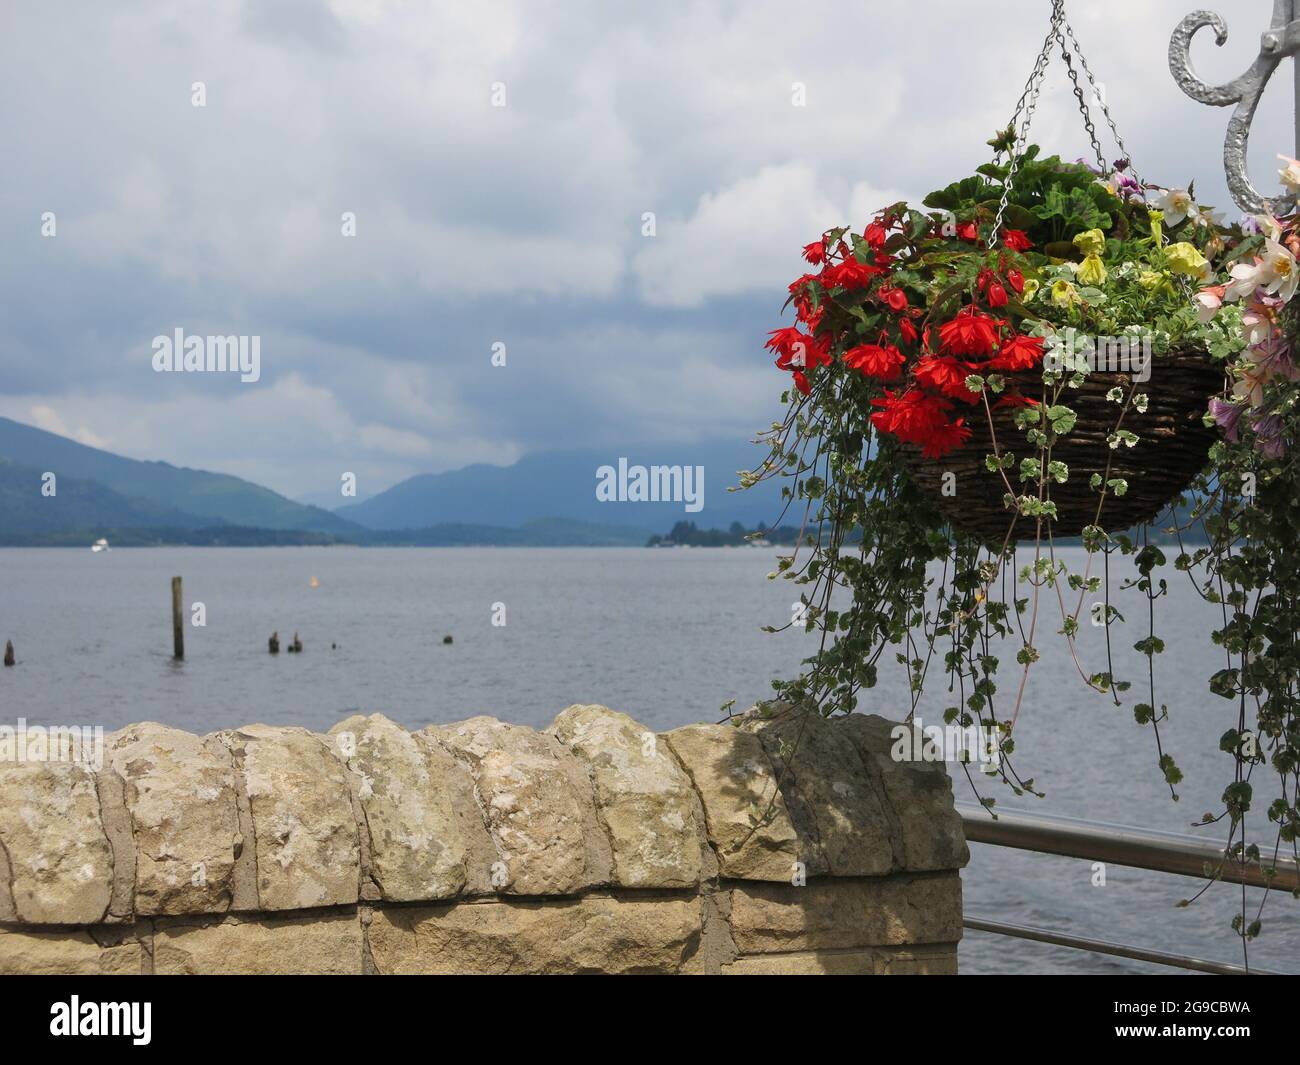 Panoramic views over Loch Lomond from the restaurant at Duck Bay Marina, with hanging baskets along the terrace by the waterfront. Stock Photo